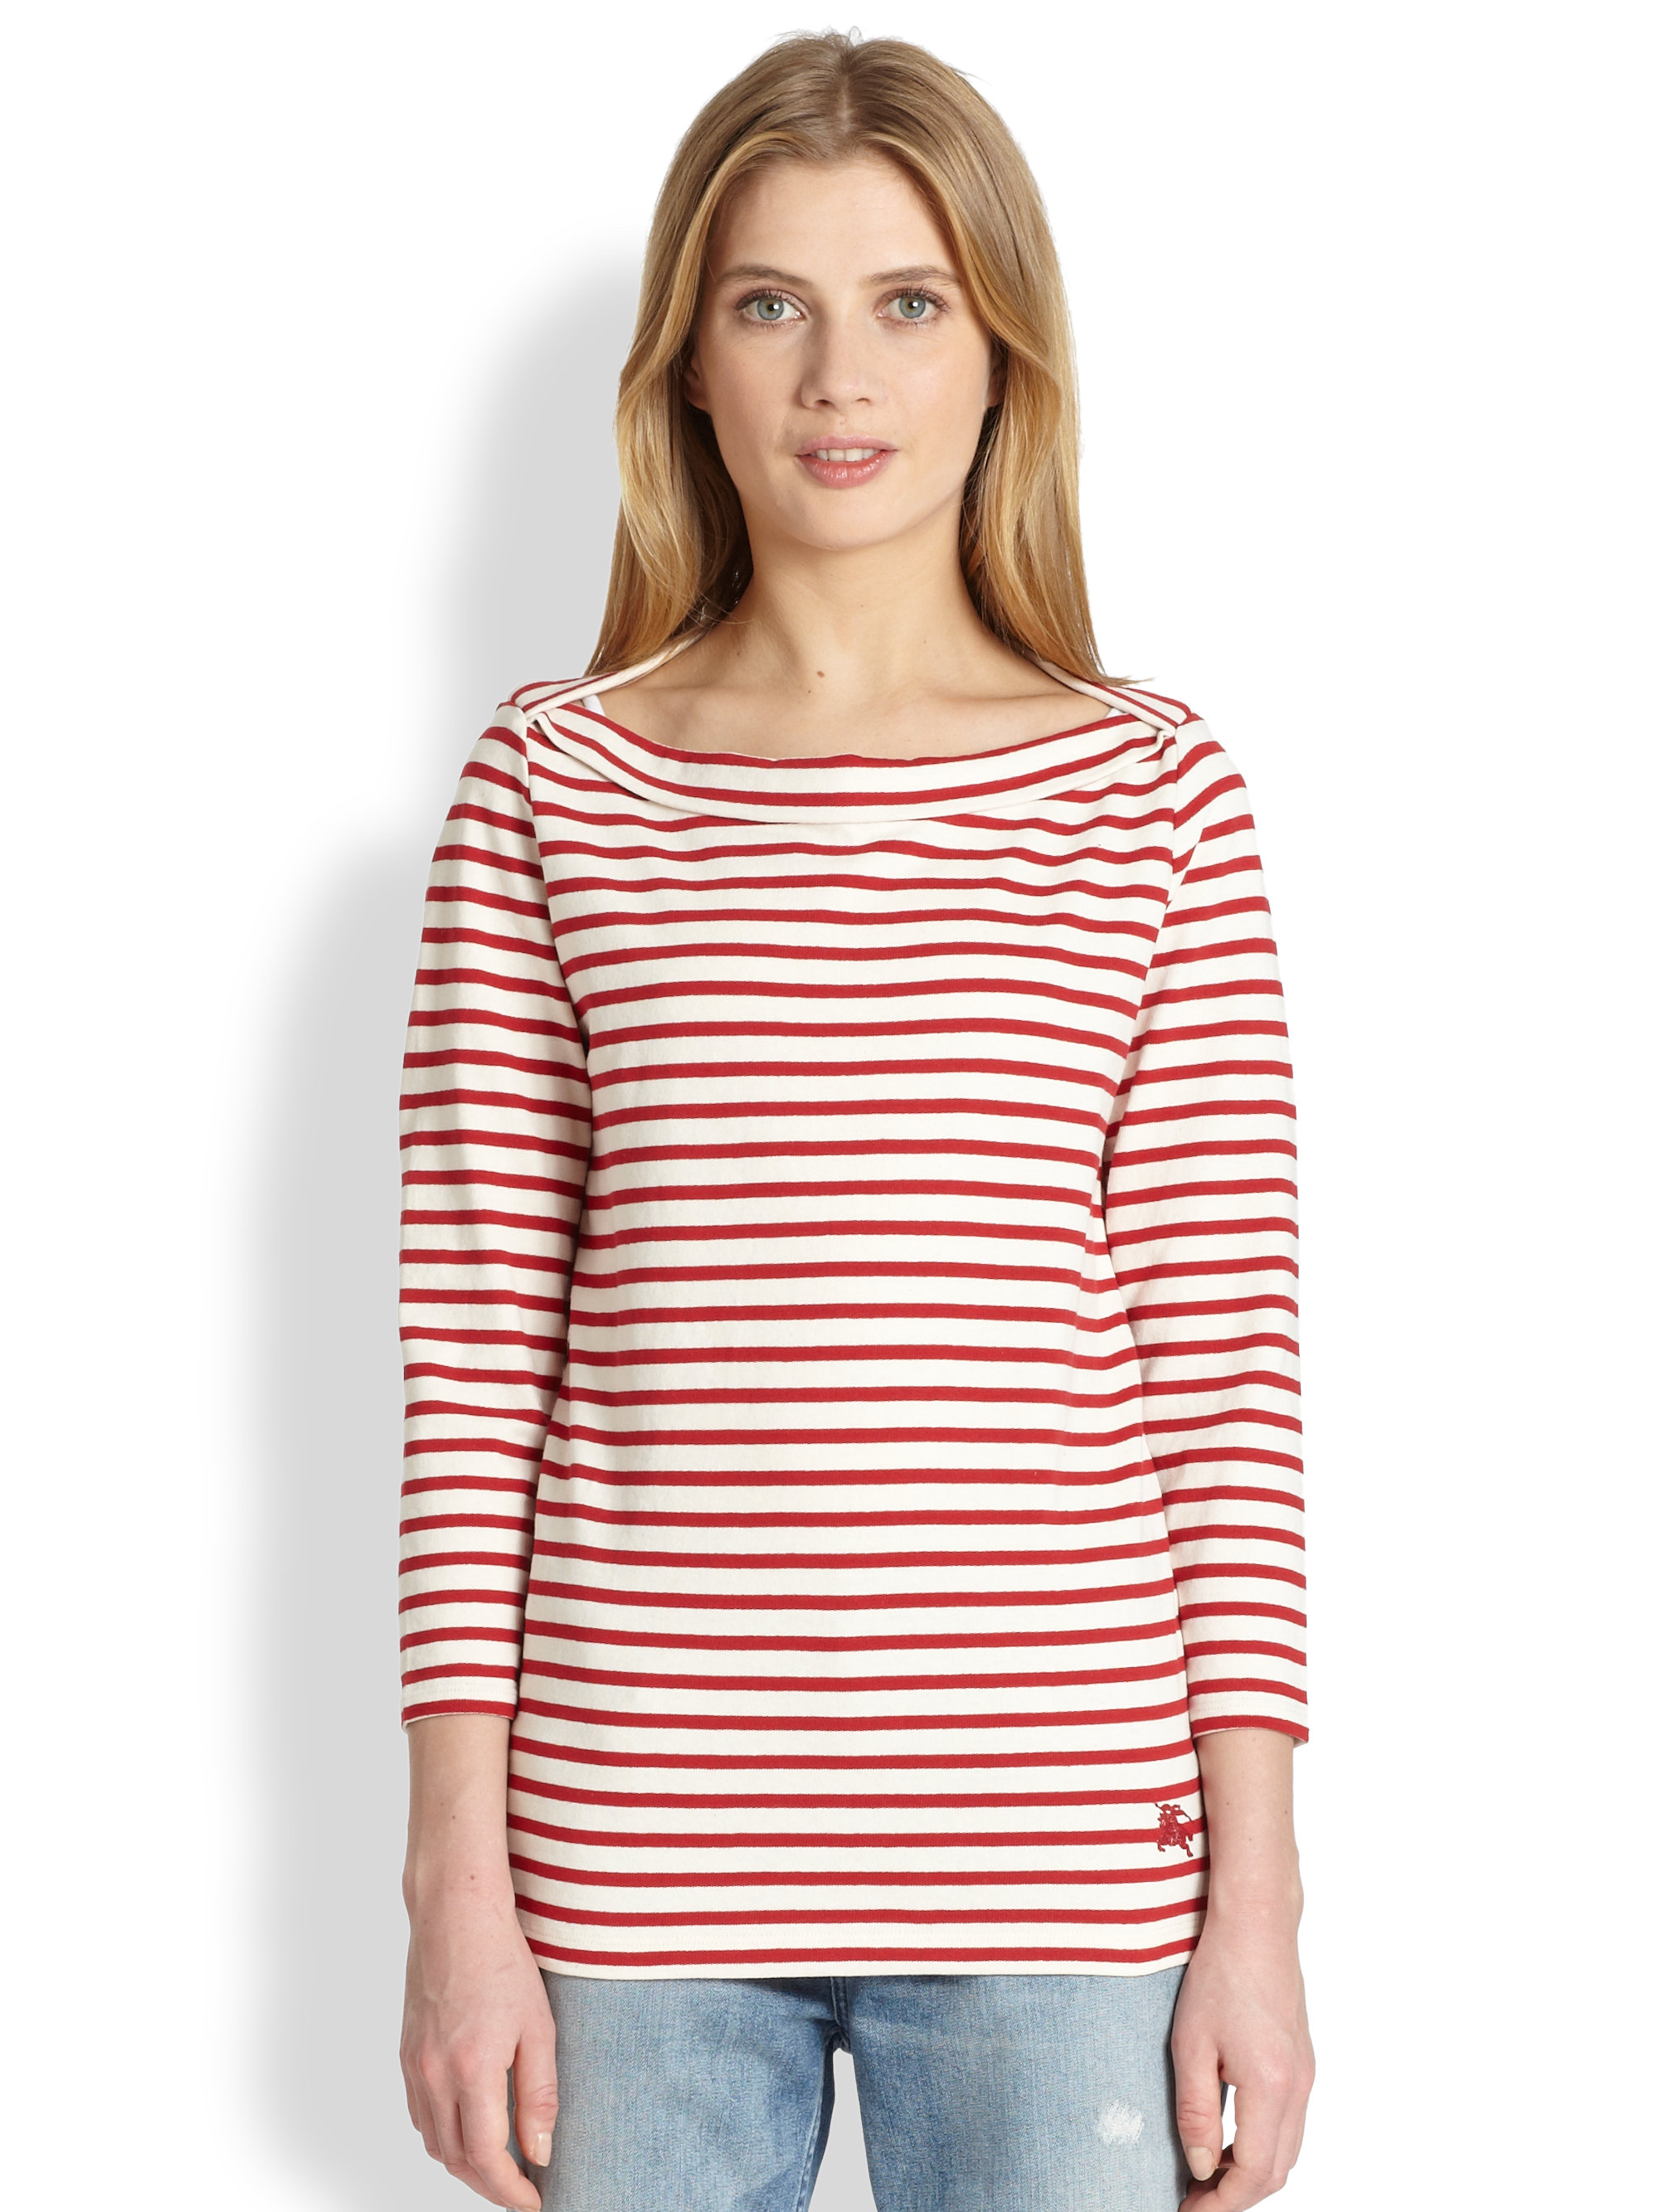 Lyst - Burberry brit Striped Boatneck Top in Red